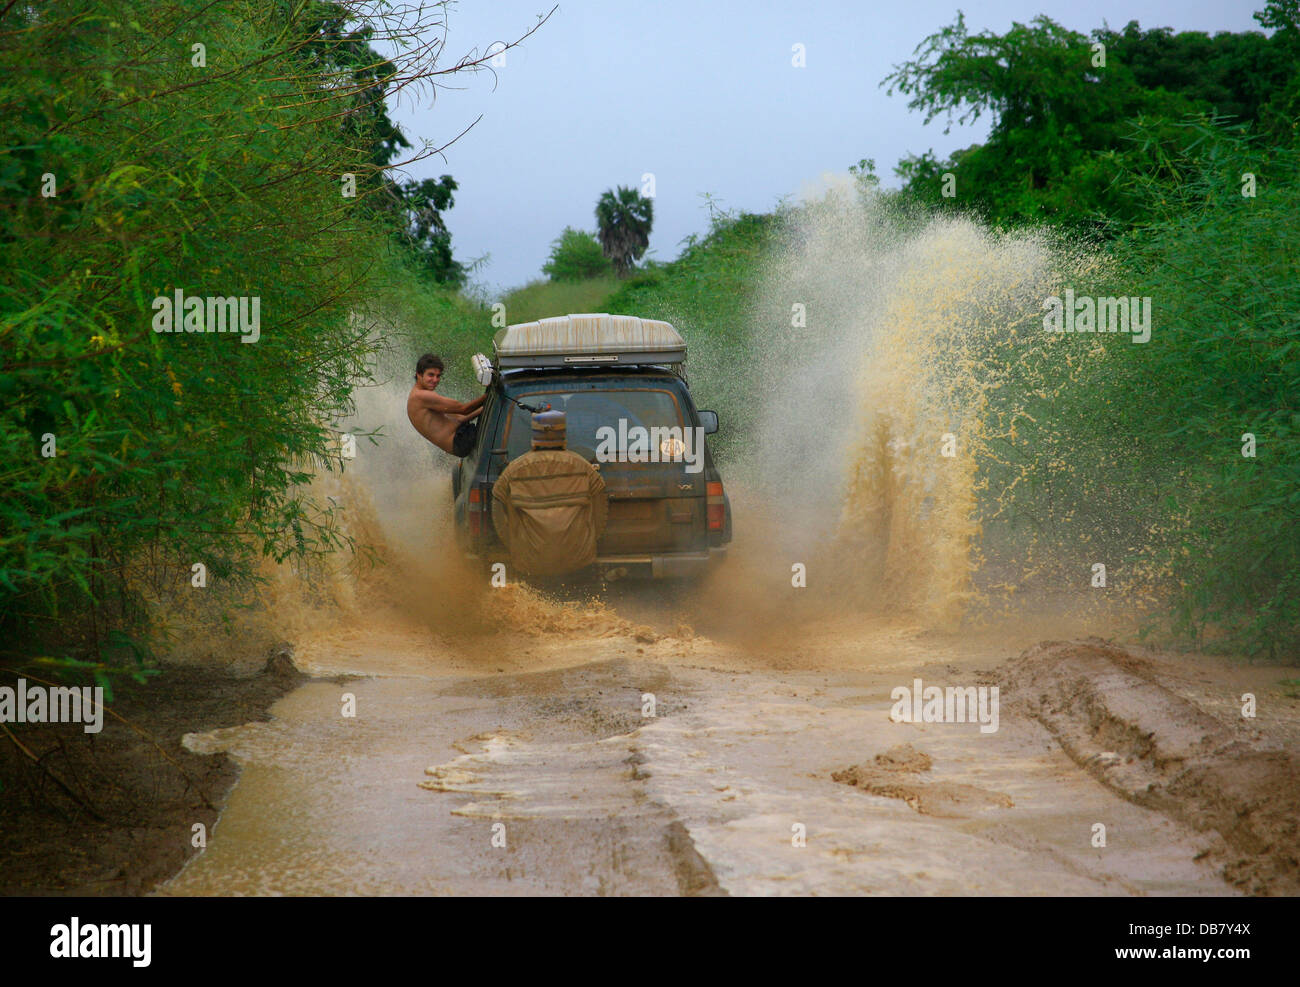 Leisure - 4x4 driving offroad driving adventure 4x4 vehicle drives through mud puddle water man hanging out car dare-devil fun Stock Photo